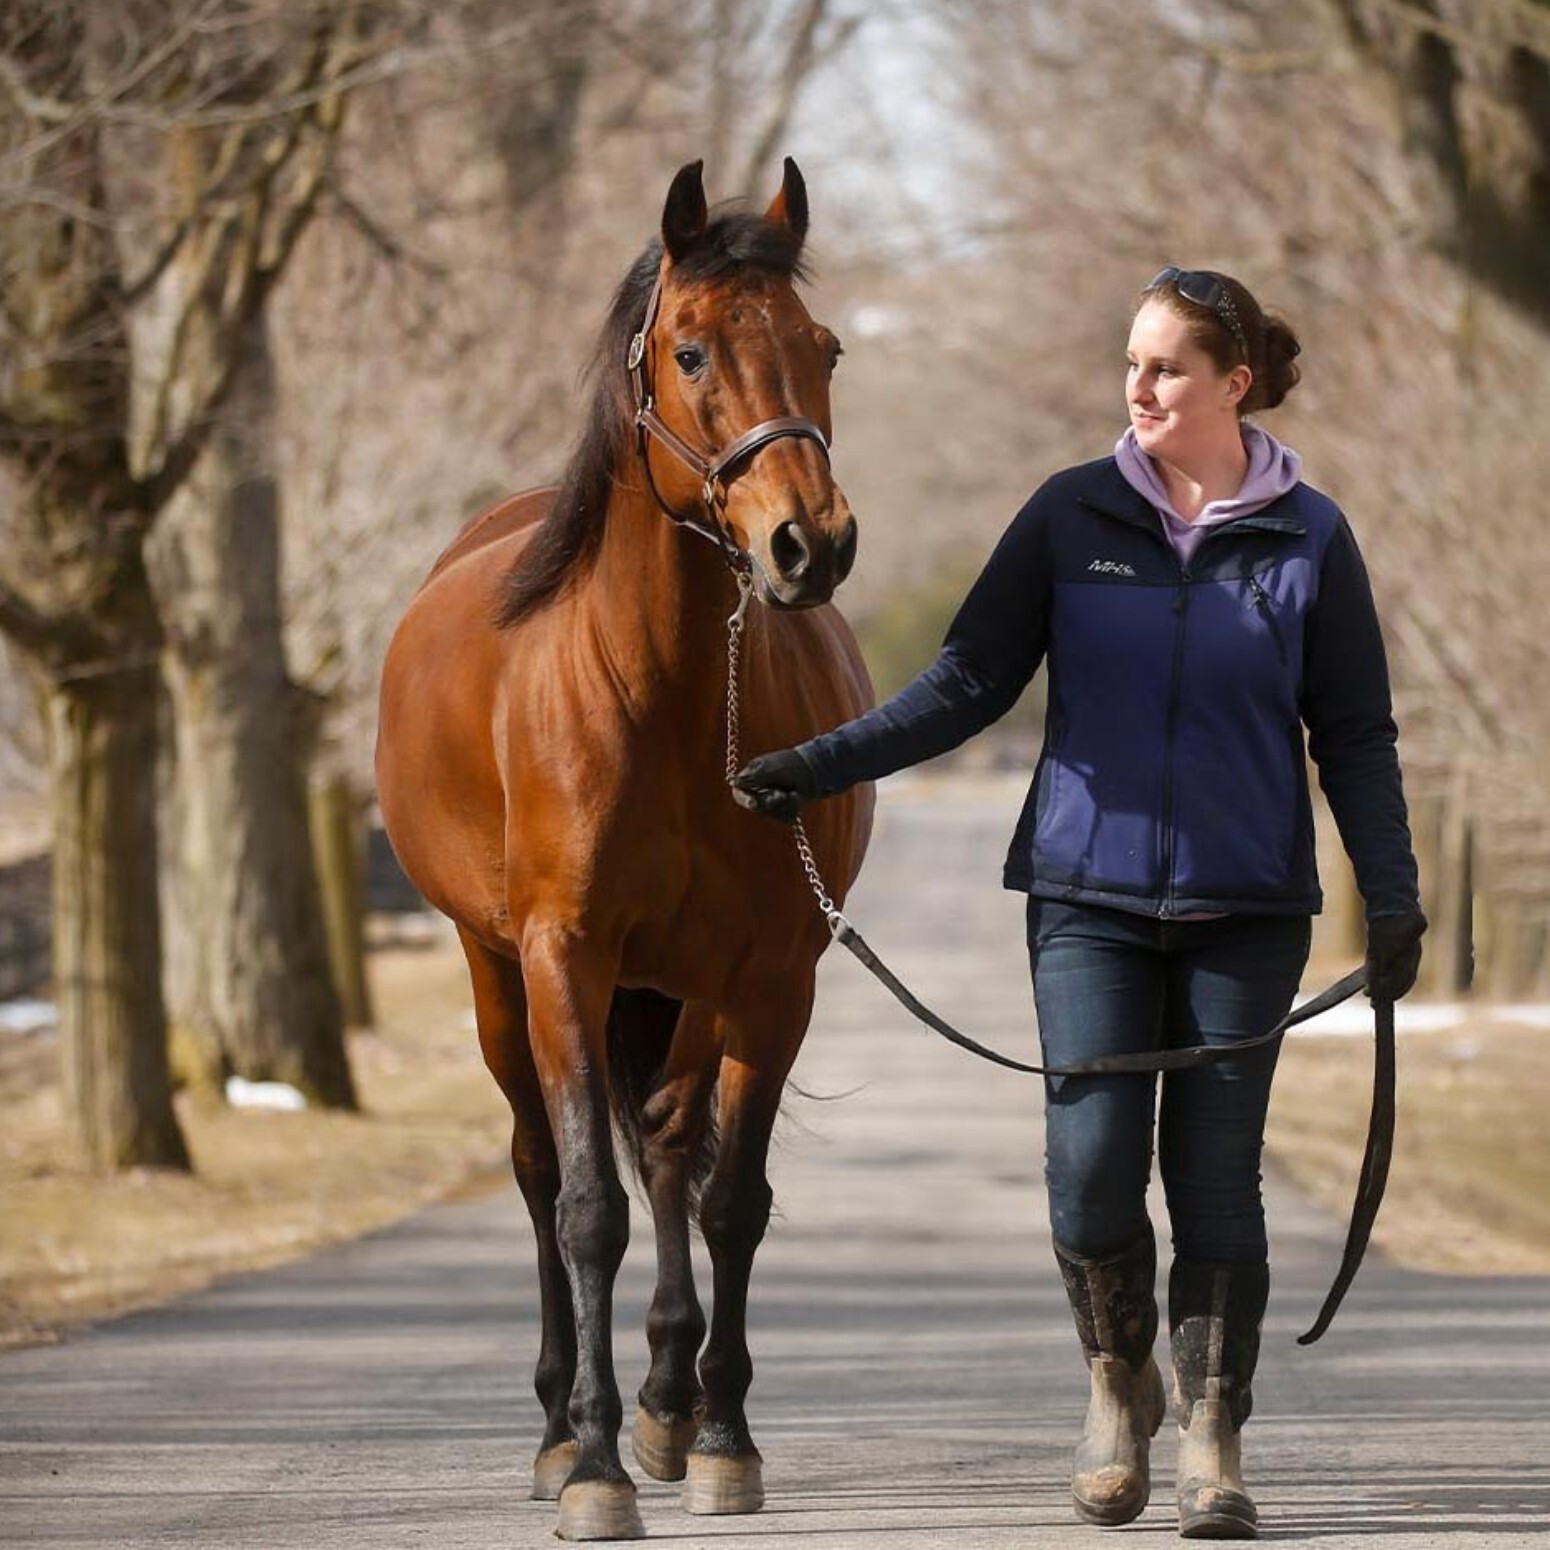 Win-Win: Creating New Careers With Horses